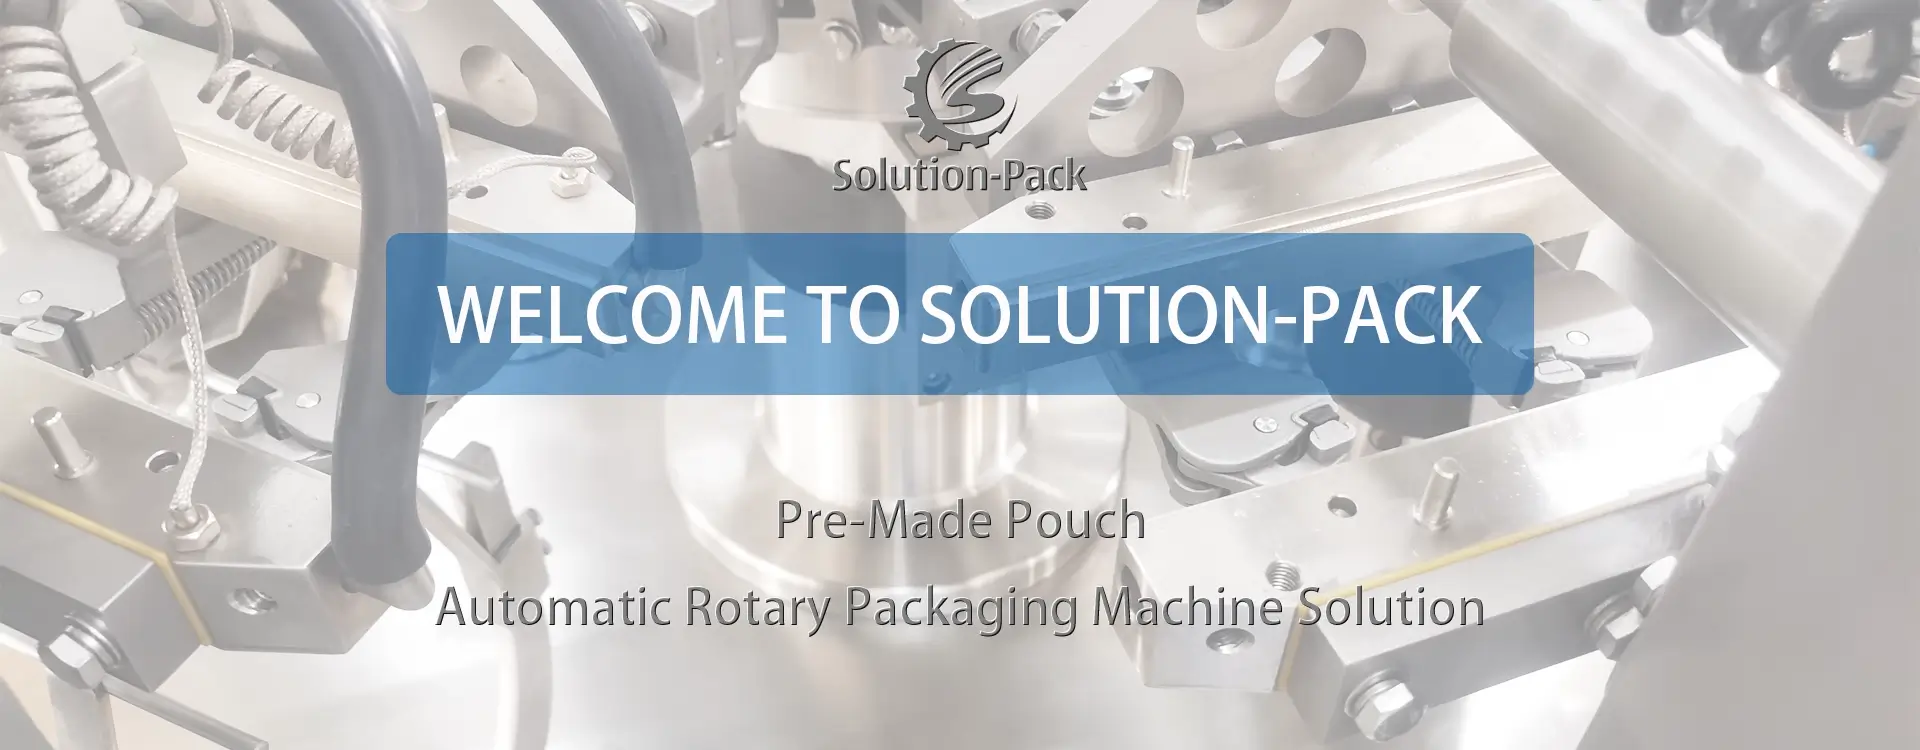 Model SP8-300G Automatic Granule Rotary Packaging Machine Solution Bottom Banner Picture | Solution-Pack